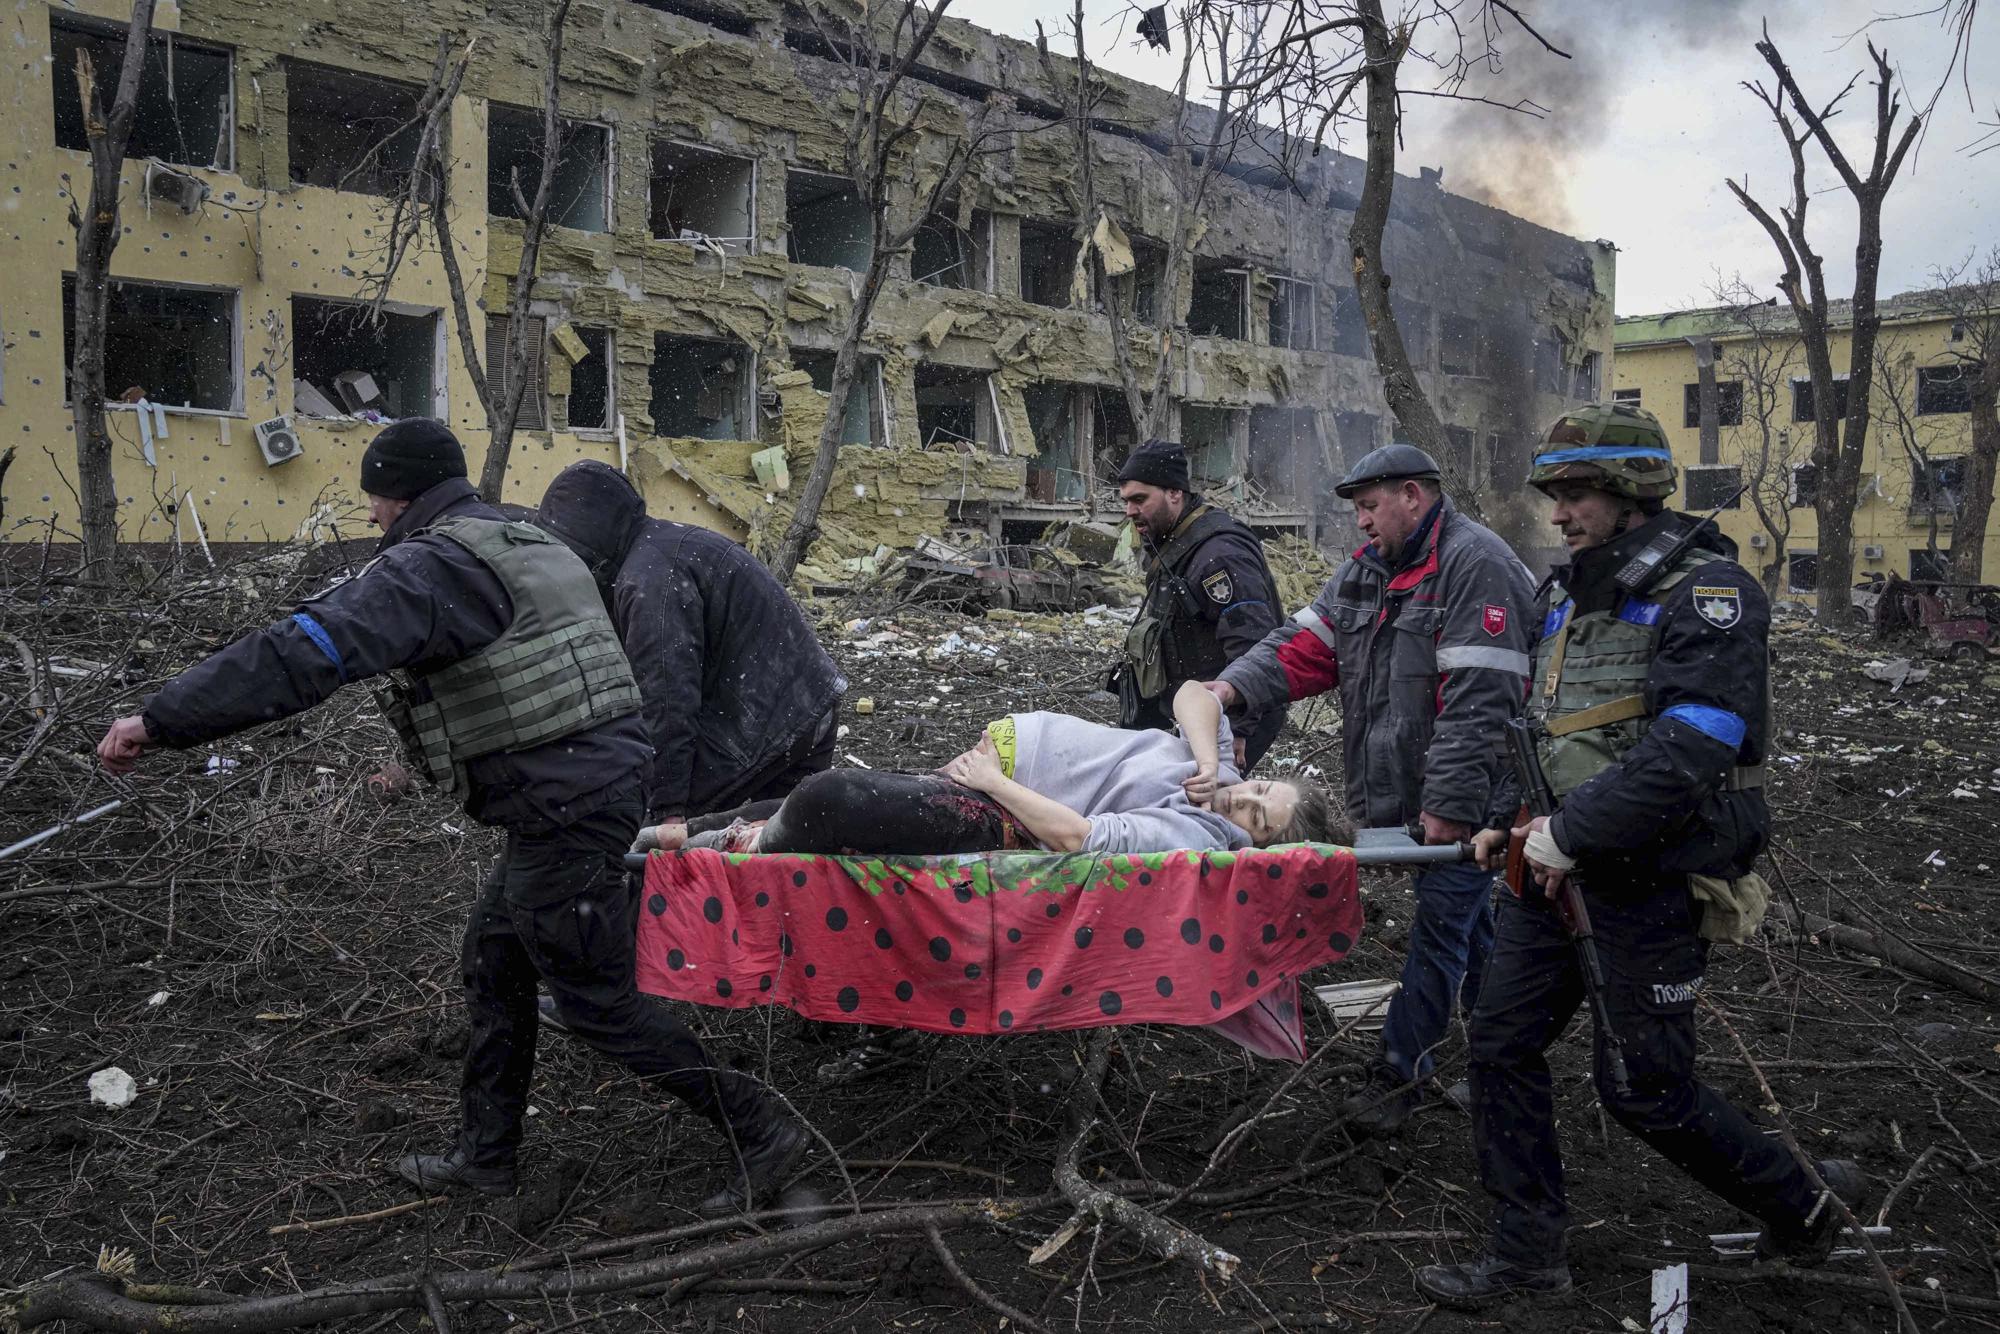 6. Ukranian emergency workers and volunteers carry an injured pregnant woman from a maternity hospital damaged by an airstrike in Mariupol, Ukraine, on March 9, 2022. The woman was taken to another hospital but did not survive.